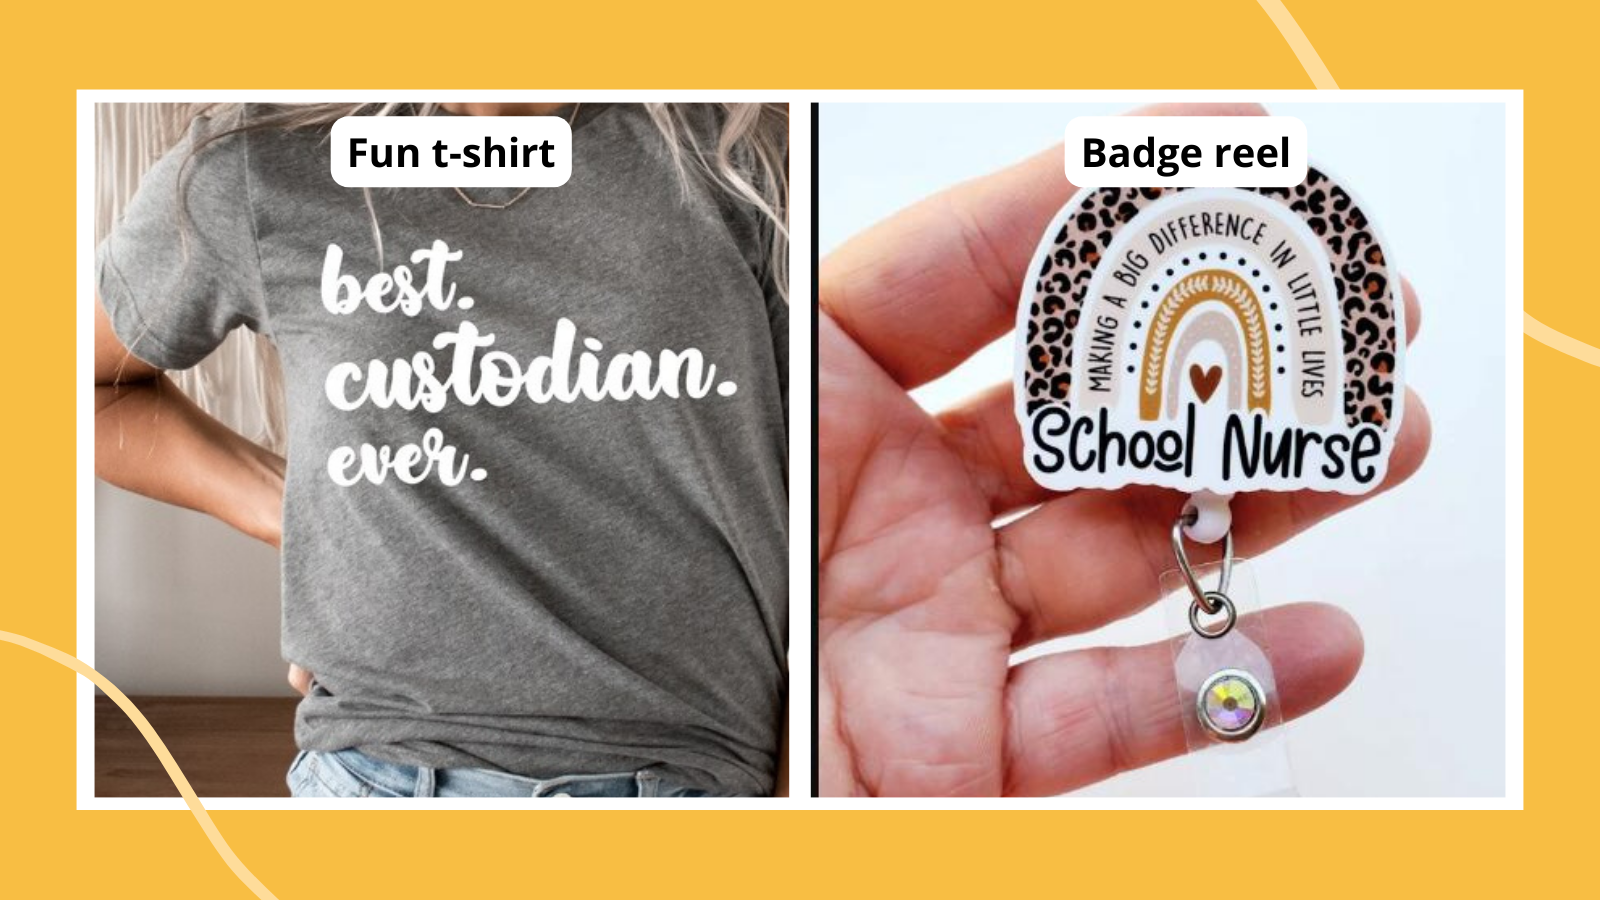 Examples of gifts for paraprofessionals and other school support staff such as a custodian t-shirt and nurse badge reel.